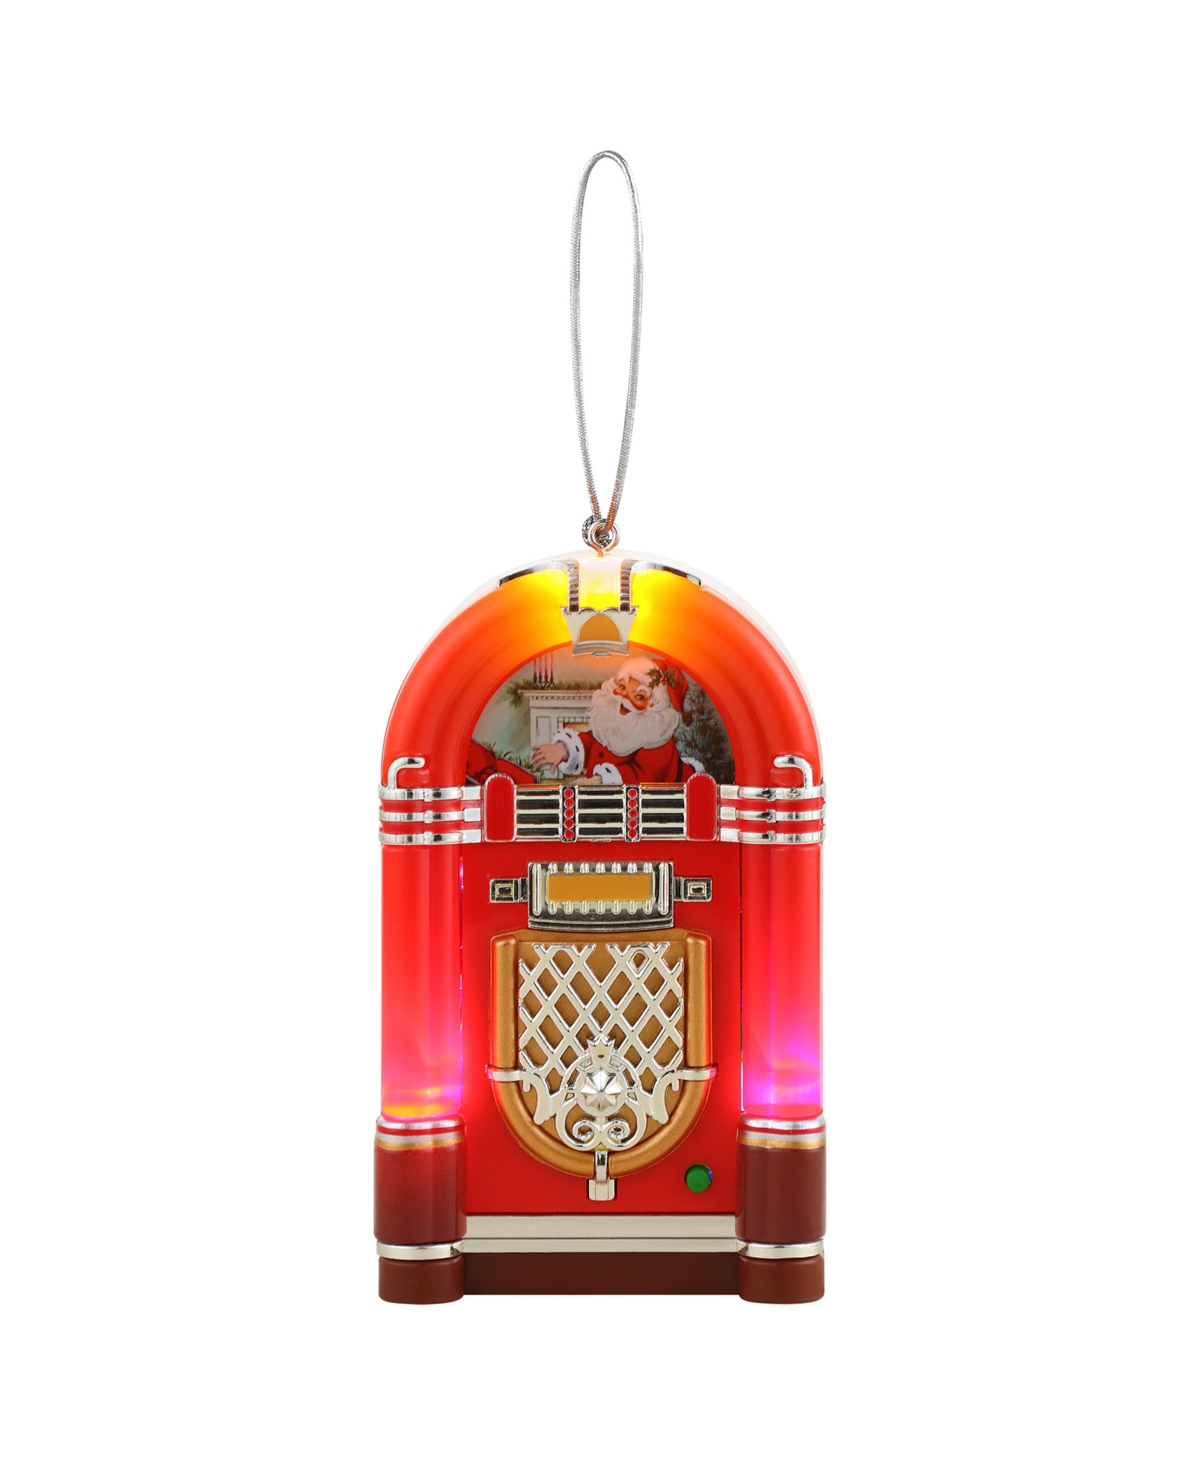 Mr. Christmas 4.9" Retro Jukebox Ornament In Red